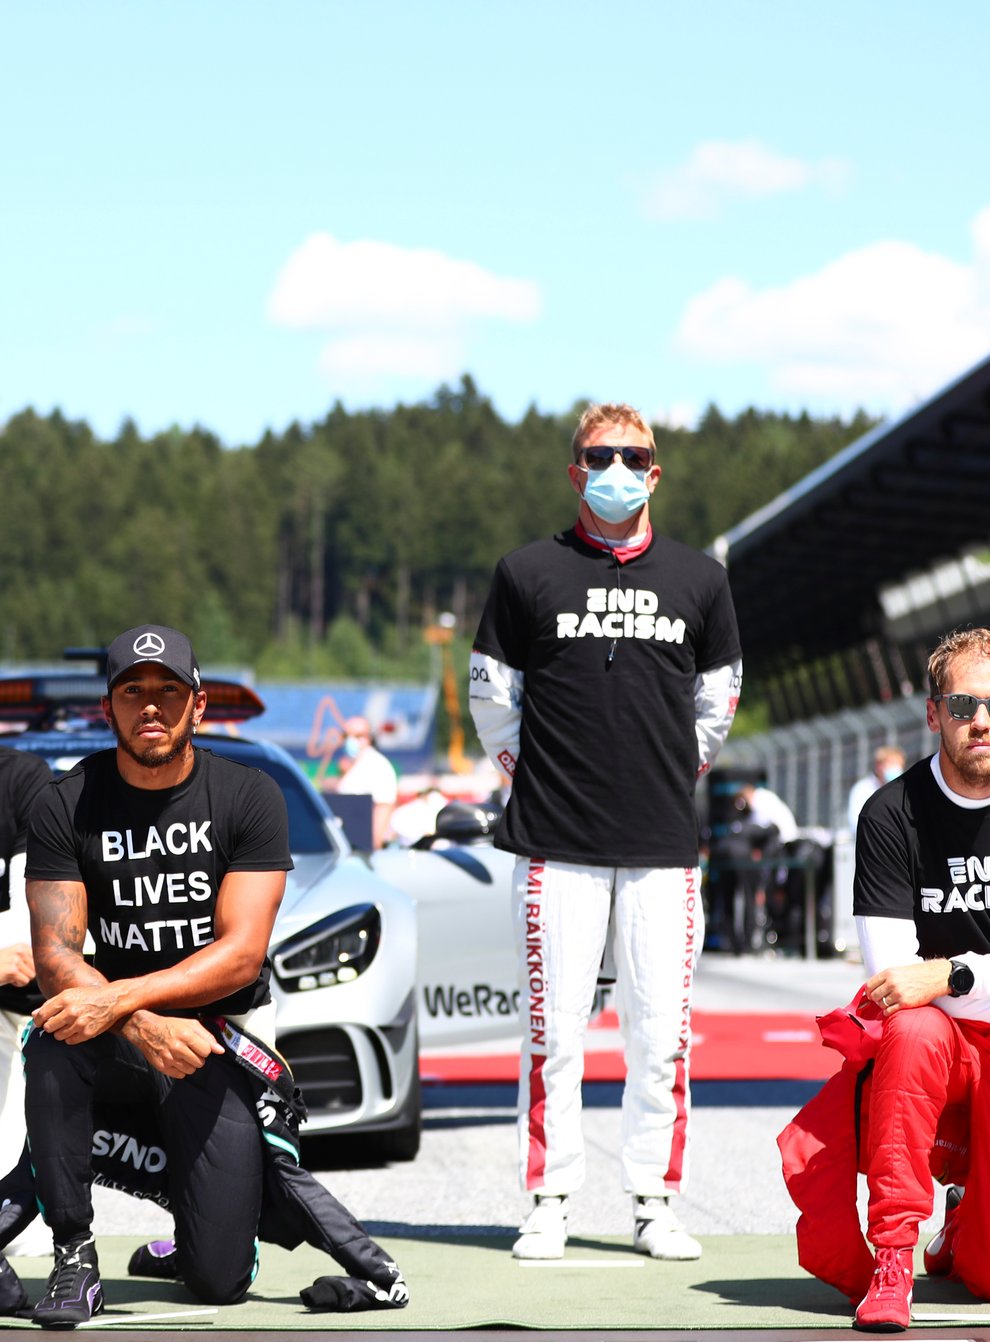 Lewis Hamilton led the "take a knee" stance in Spielberg but six drivers remained stood